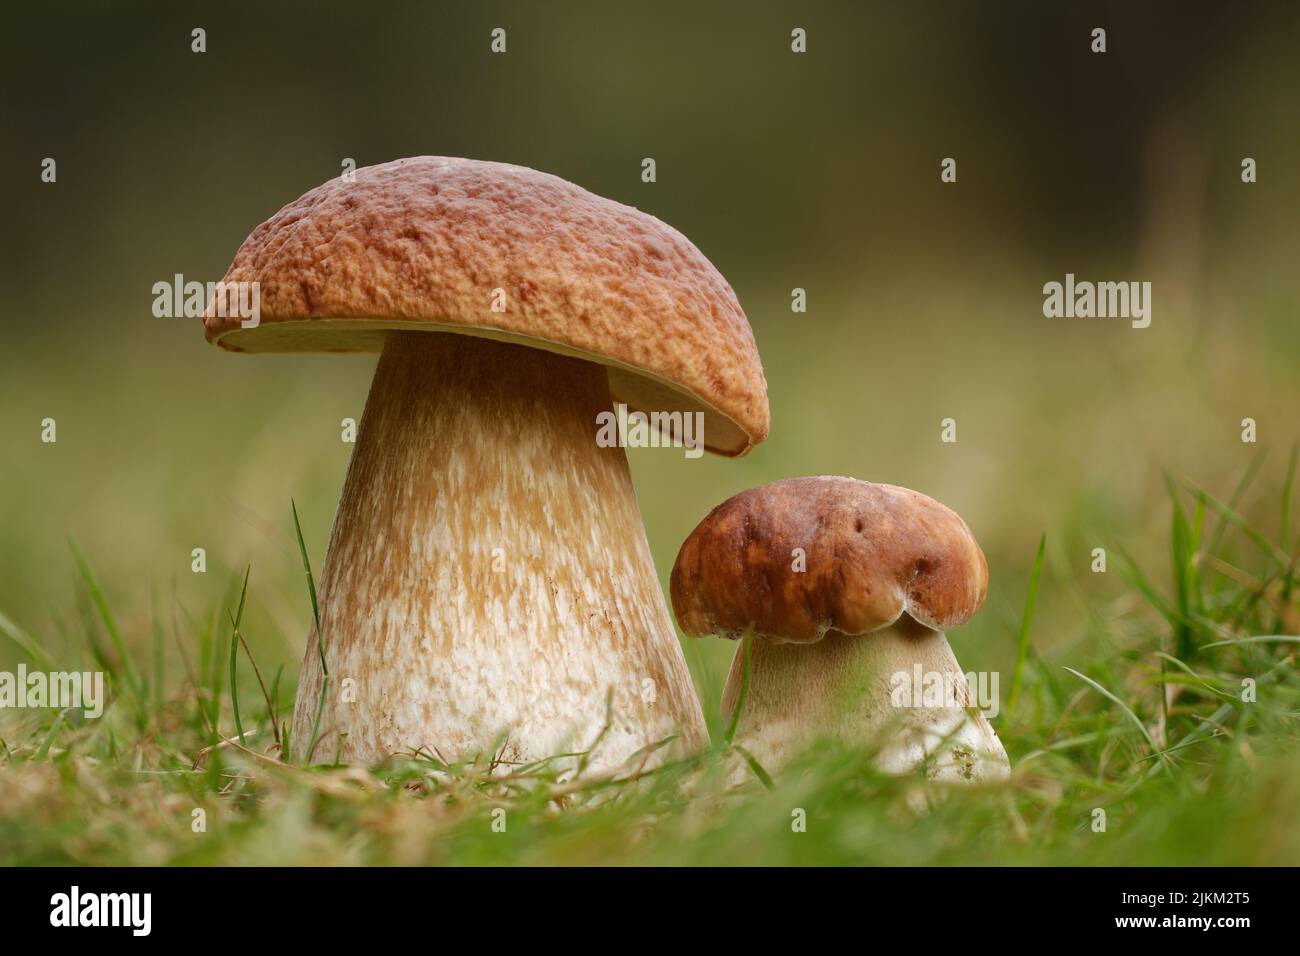 The celebrated wild mushroom, the Cep, Penny Bun, Porcini - all used to describe the Boletus edulis mushroom, highly prized for its culinary qualities Stock Photo